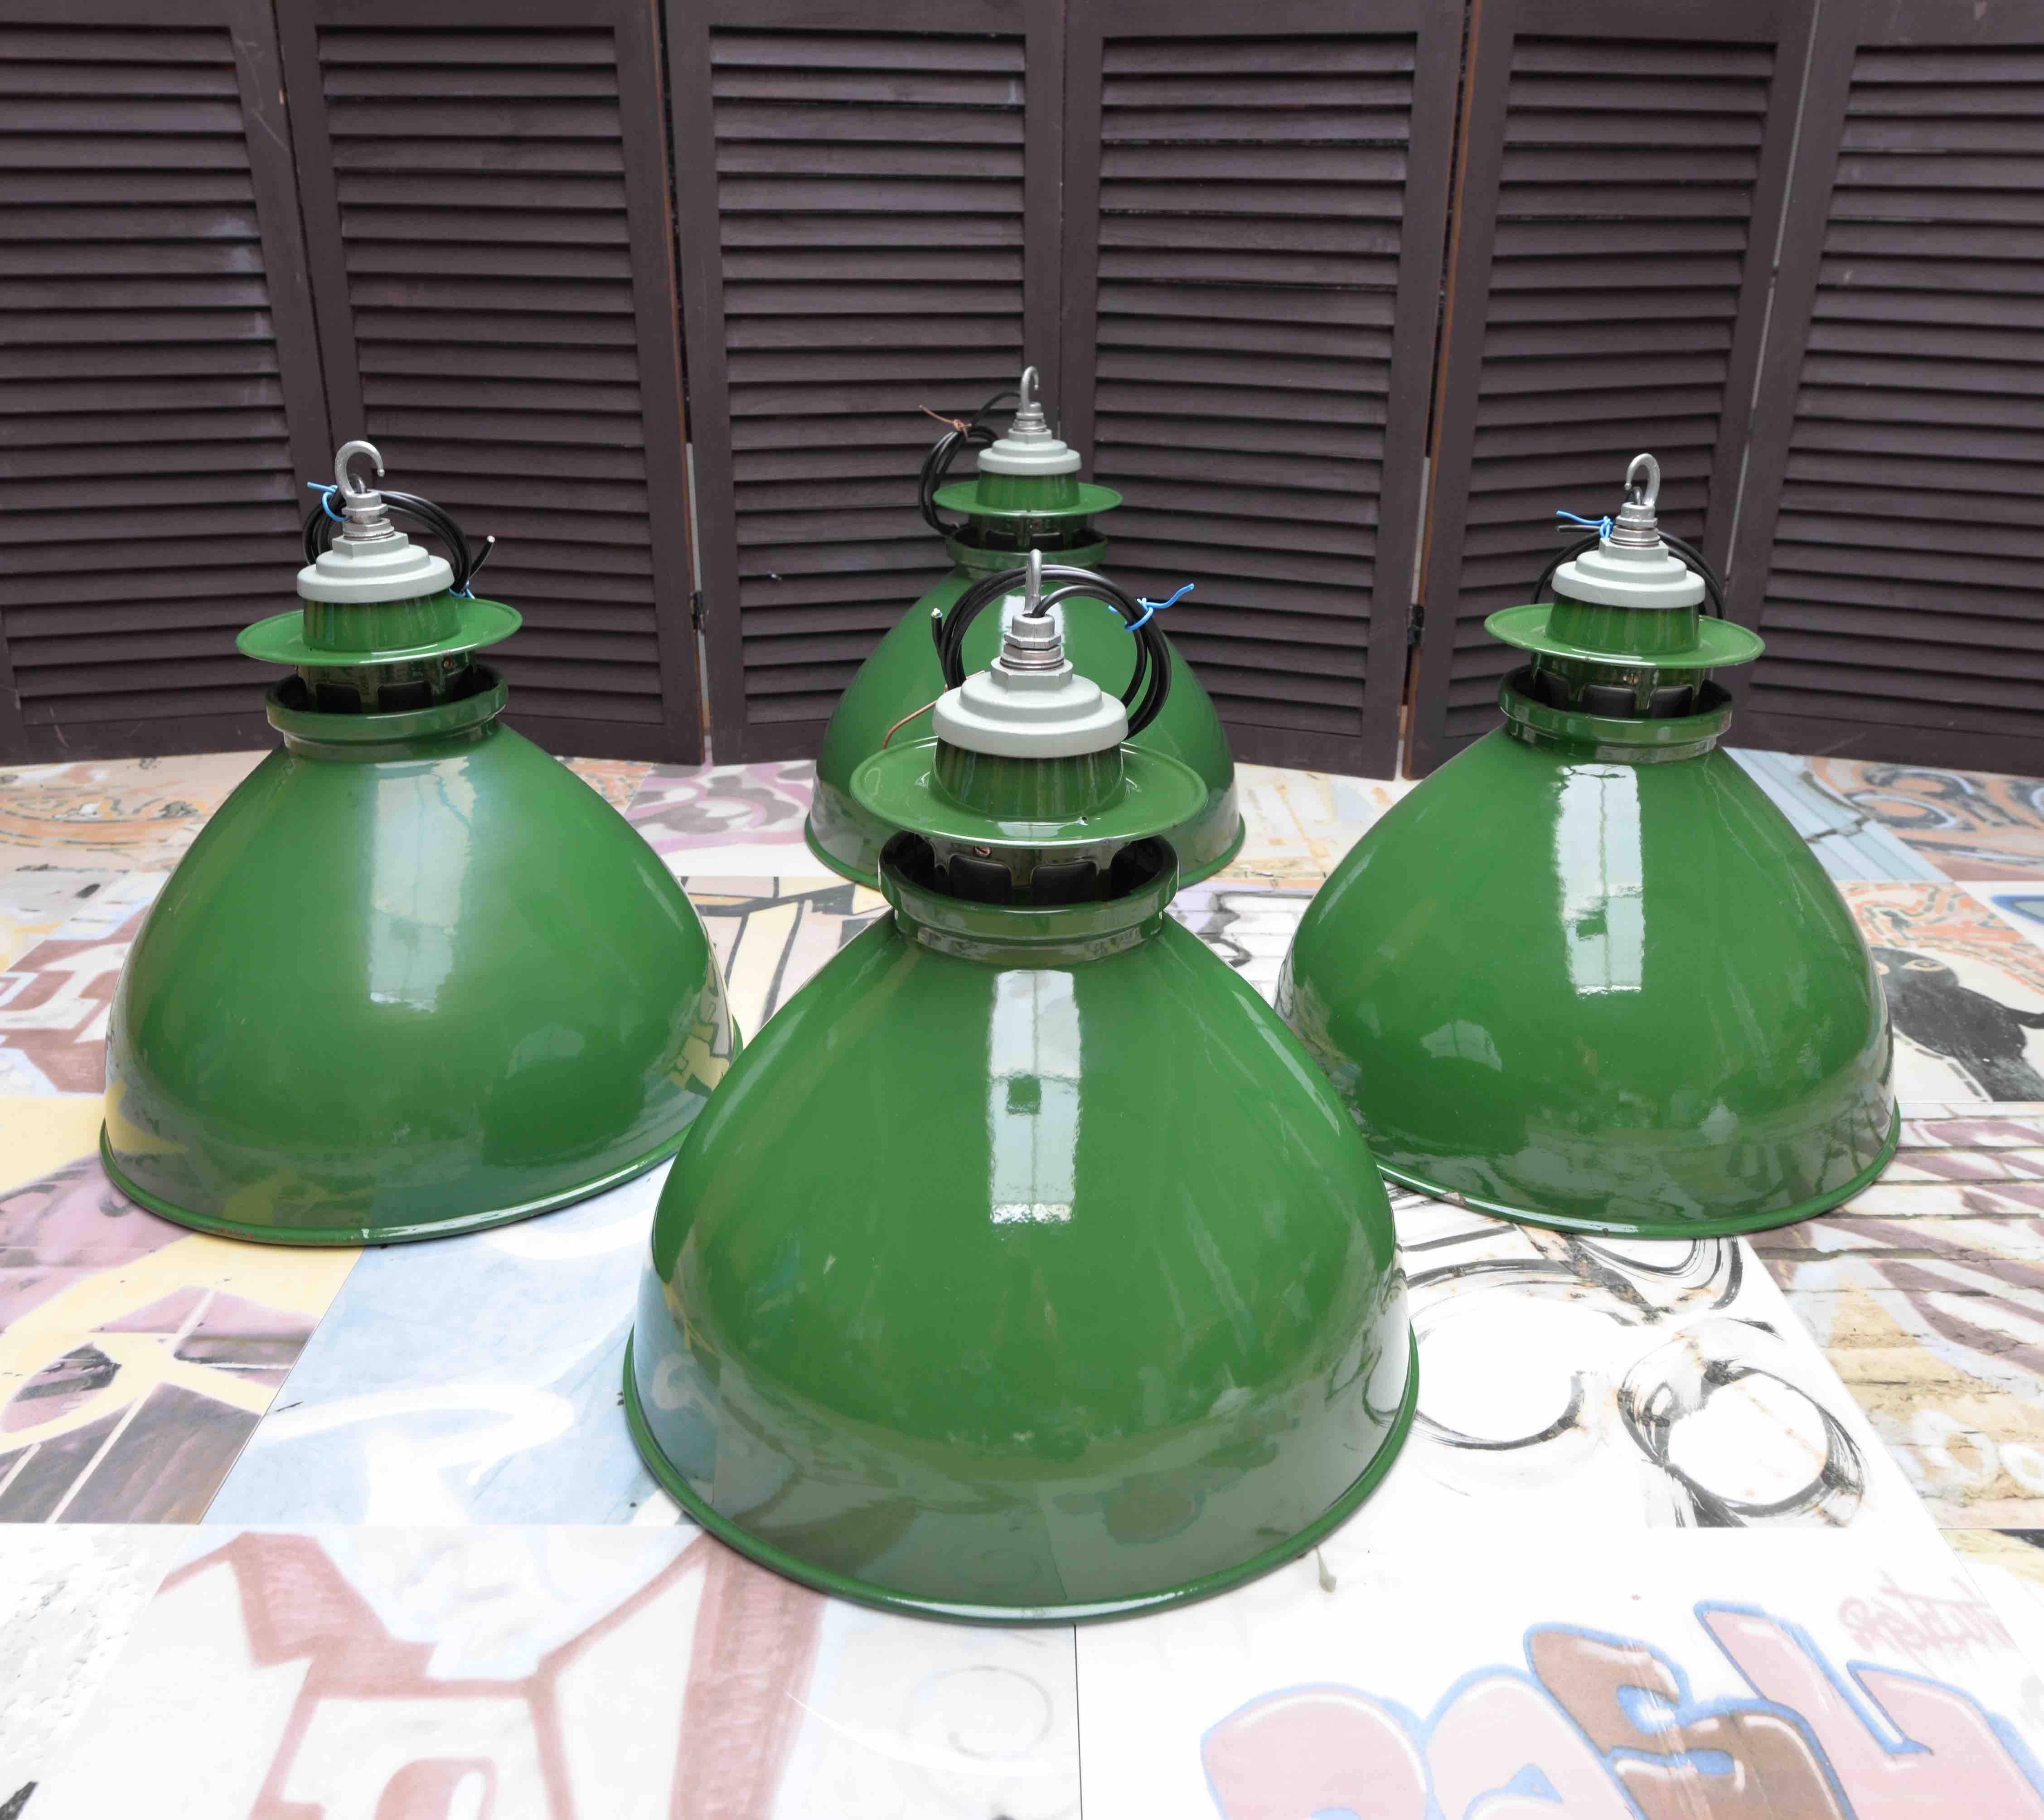 If shipped to the US or EU, no import tax applies. 

1 light available. 

These green pendants have been cleaned, polished and rewired.

The bulb fittings are original ceramic and the top fittings are detachable from the shades.

The